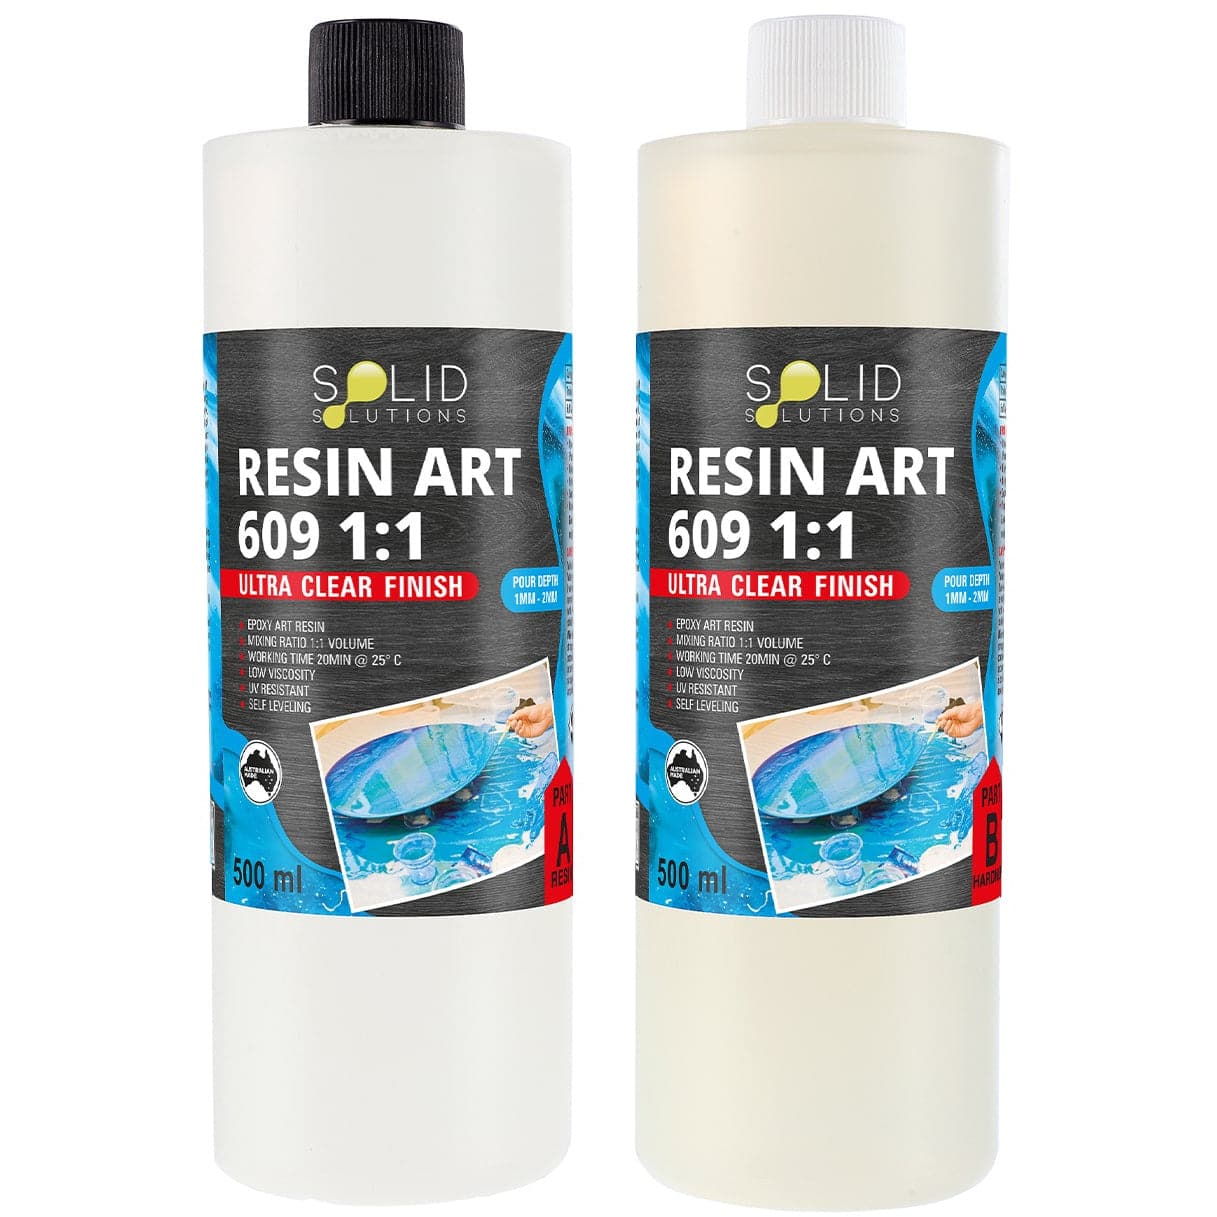 Image of Solid Solutions Resin Art Epoxy 609 1:1 1Litre Kit